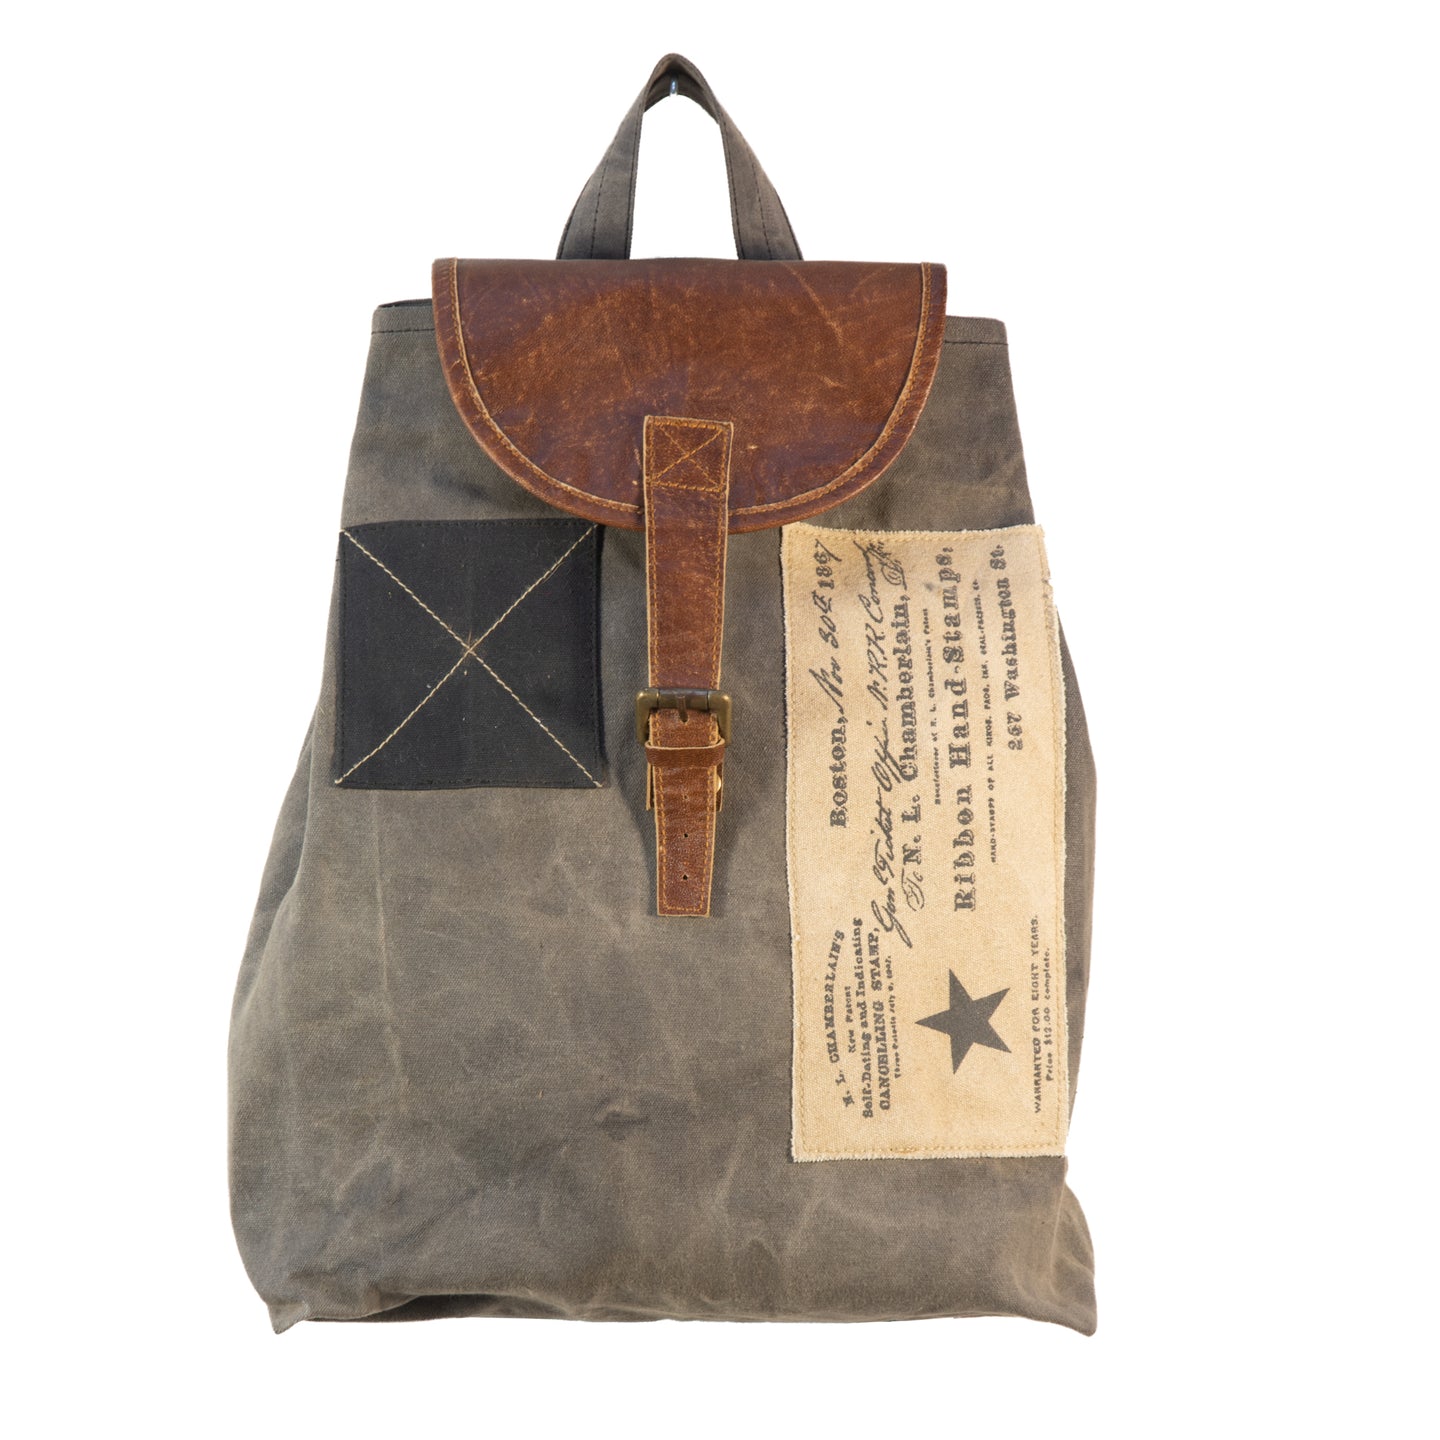 Vintage Recycled Canvas and Leather Unisex Rucksack/Backpack - Dorset Bay 610